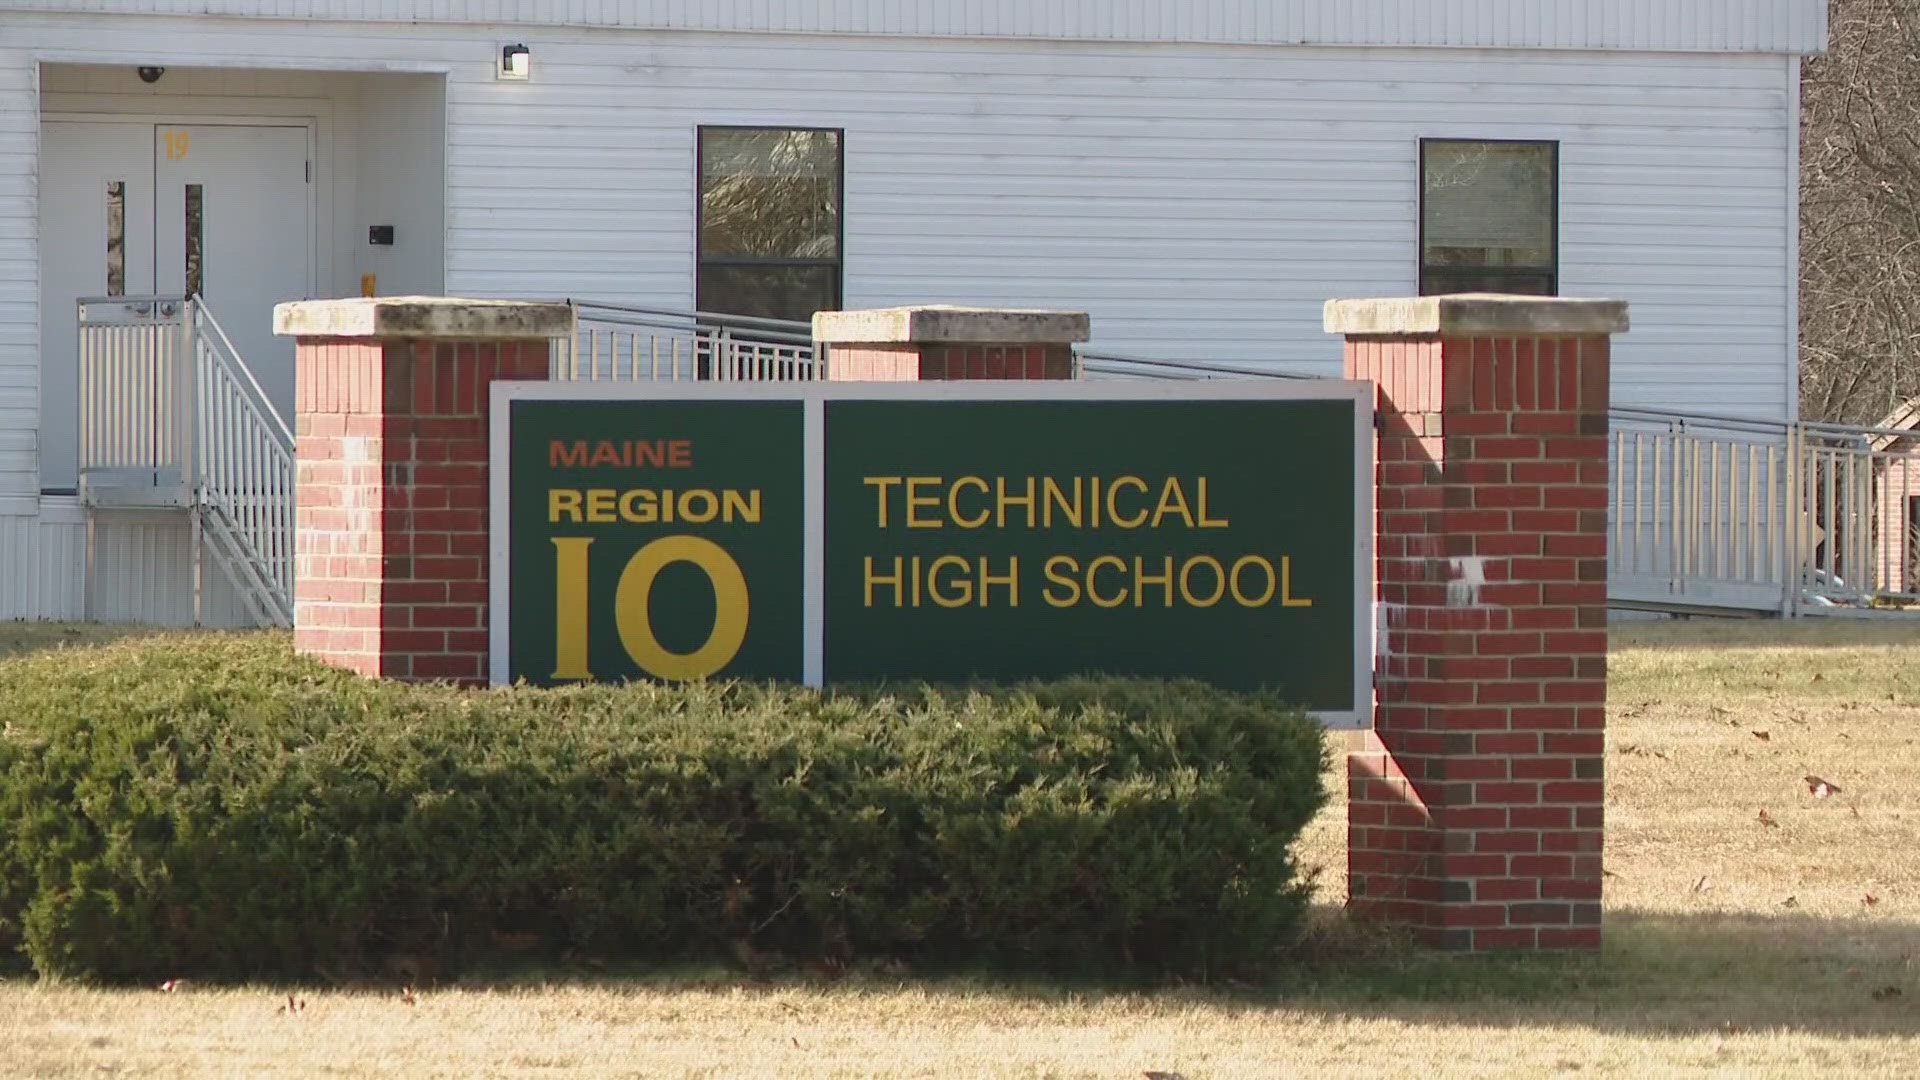 Several school administrators in Maine were told by police that similar threats were made statewide.